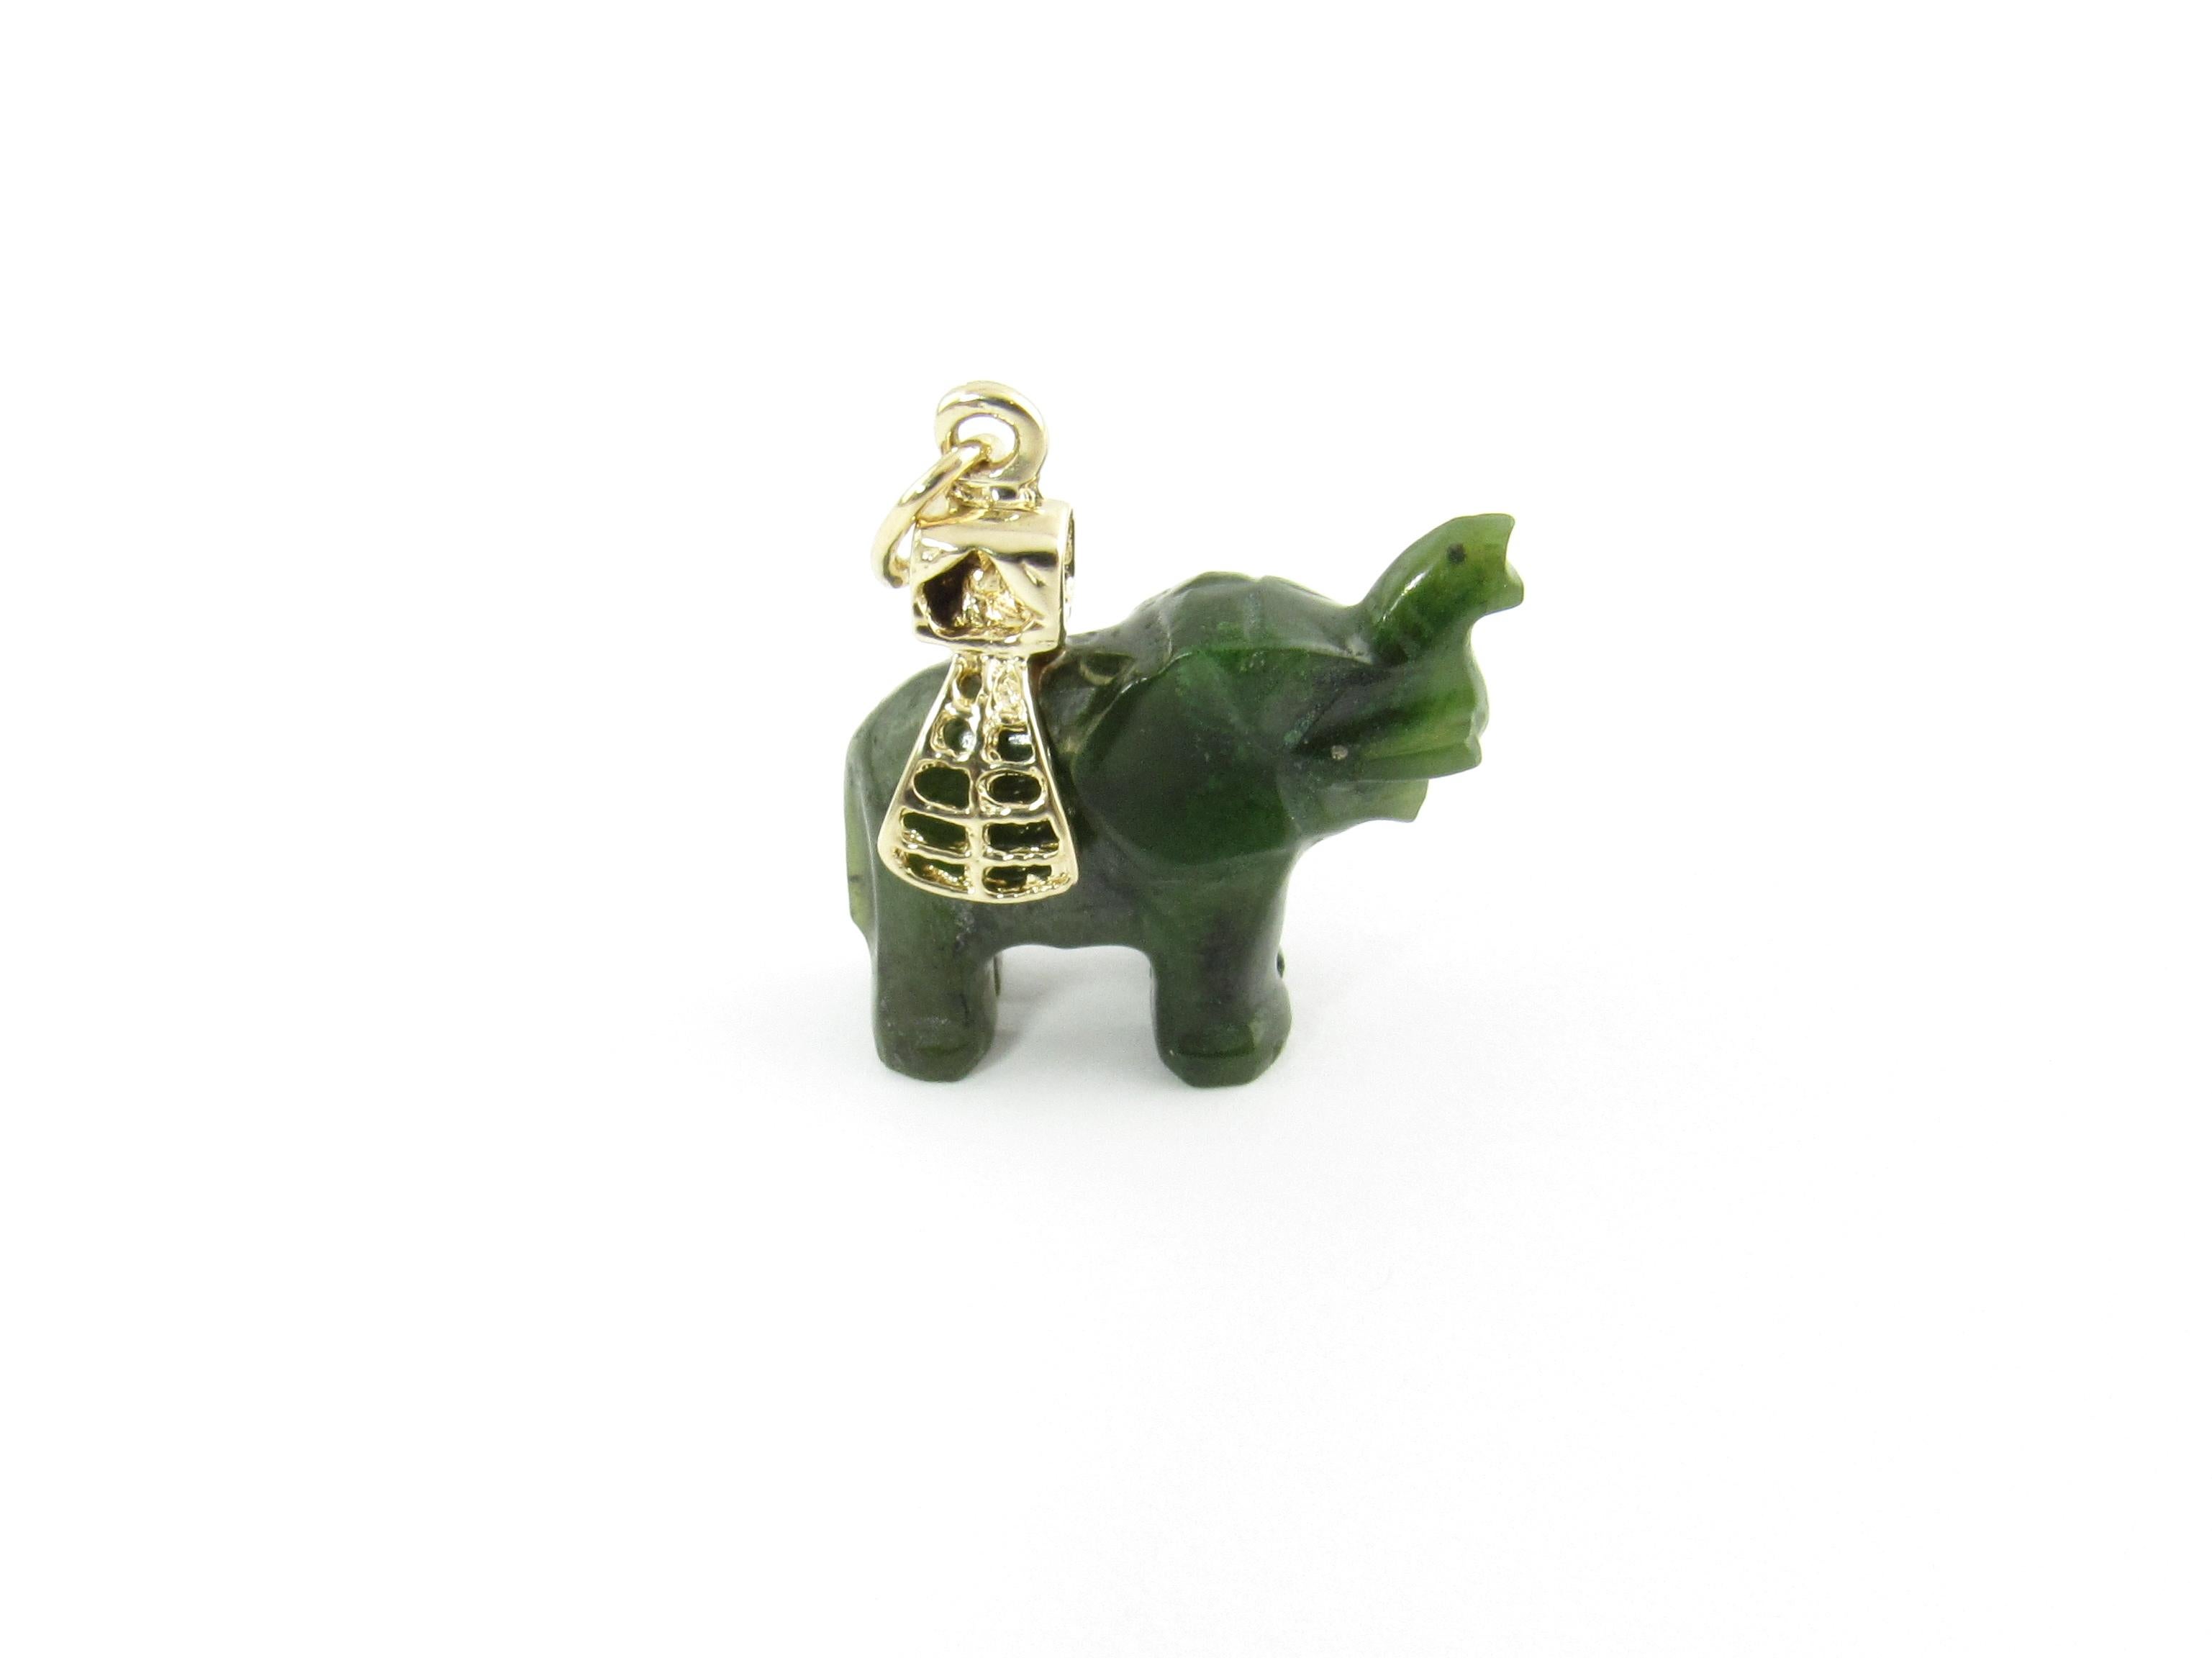 Vintage 14 Karat Yellow Gold and Jade Elephant Pendant

This lovely jade pendant features a beautifully detailed elephant accented with 14K yellow gold.

Size: 22 mm x 21 mm

Weight: 3.2 dwt. / 5.1 gr.

Stamped: 14K

Very good condition,